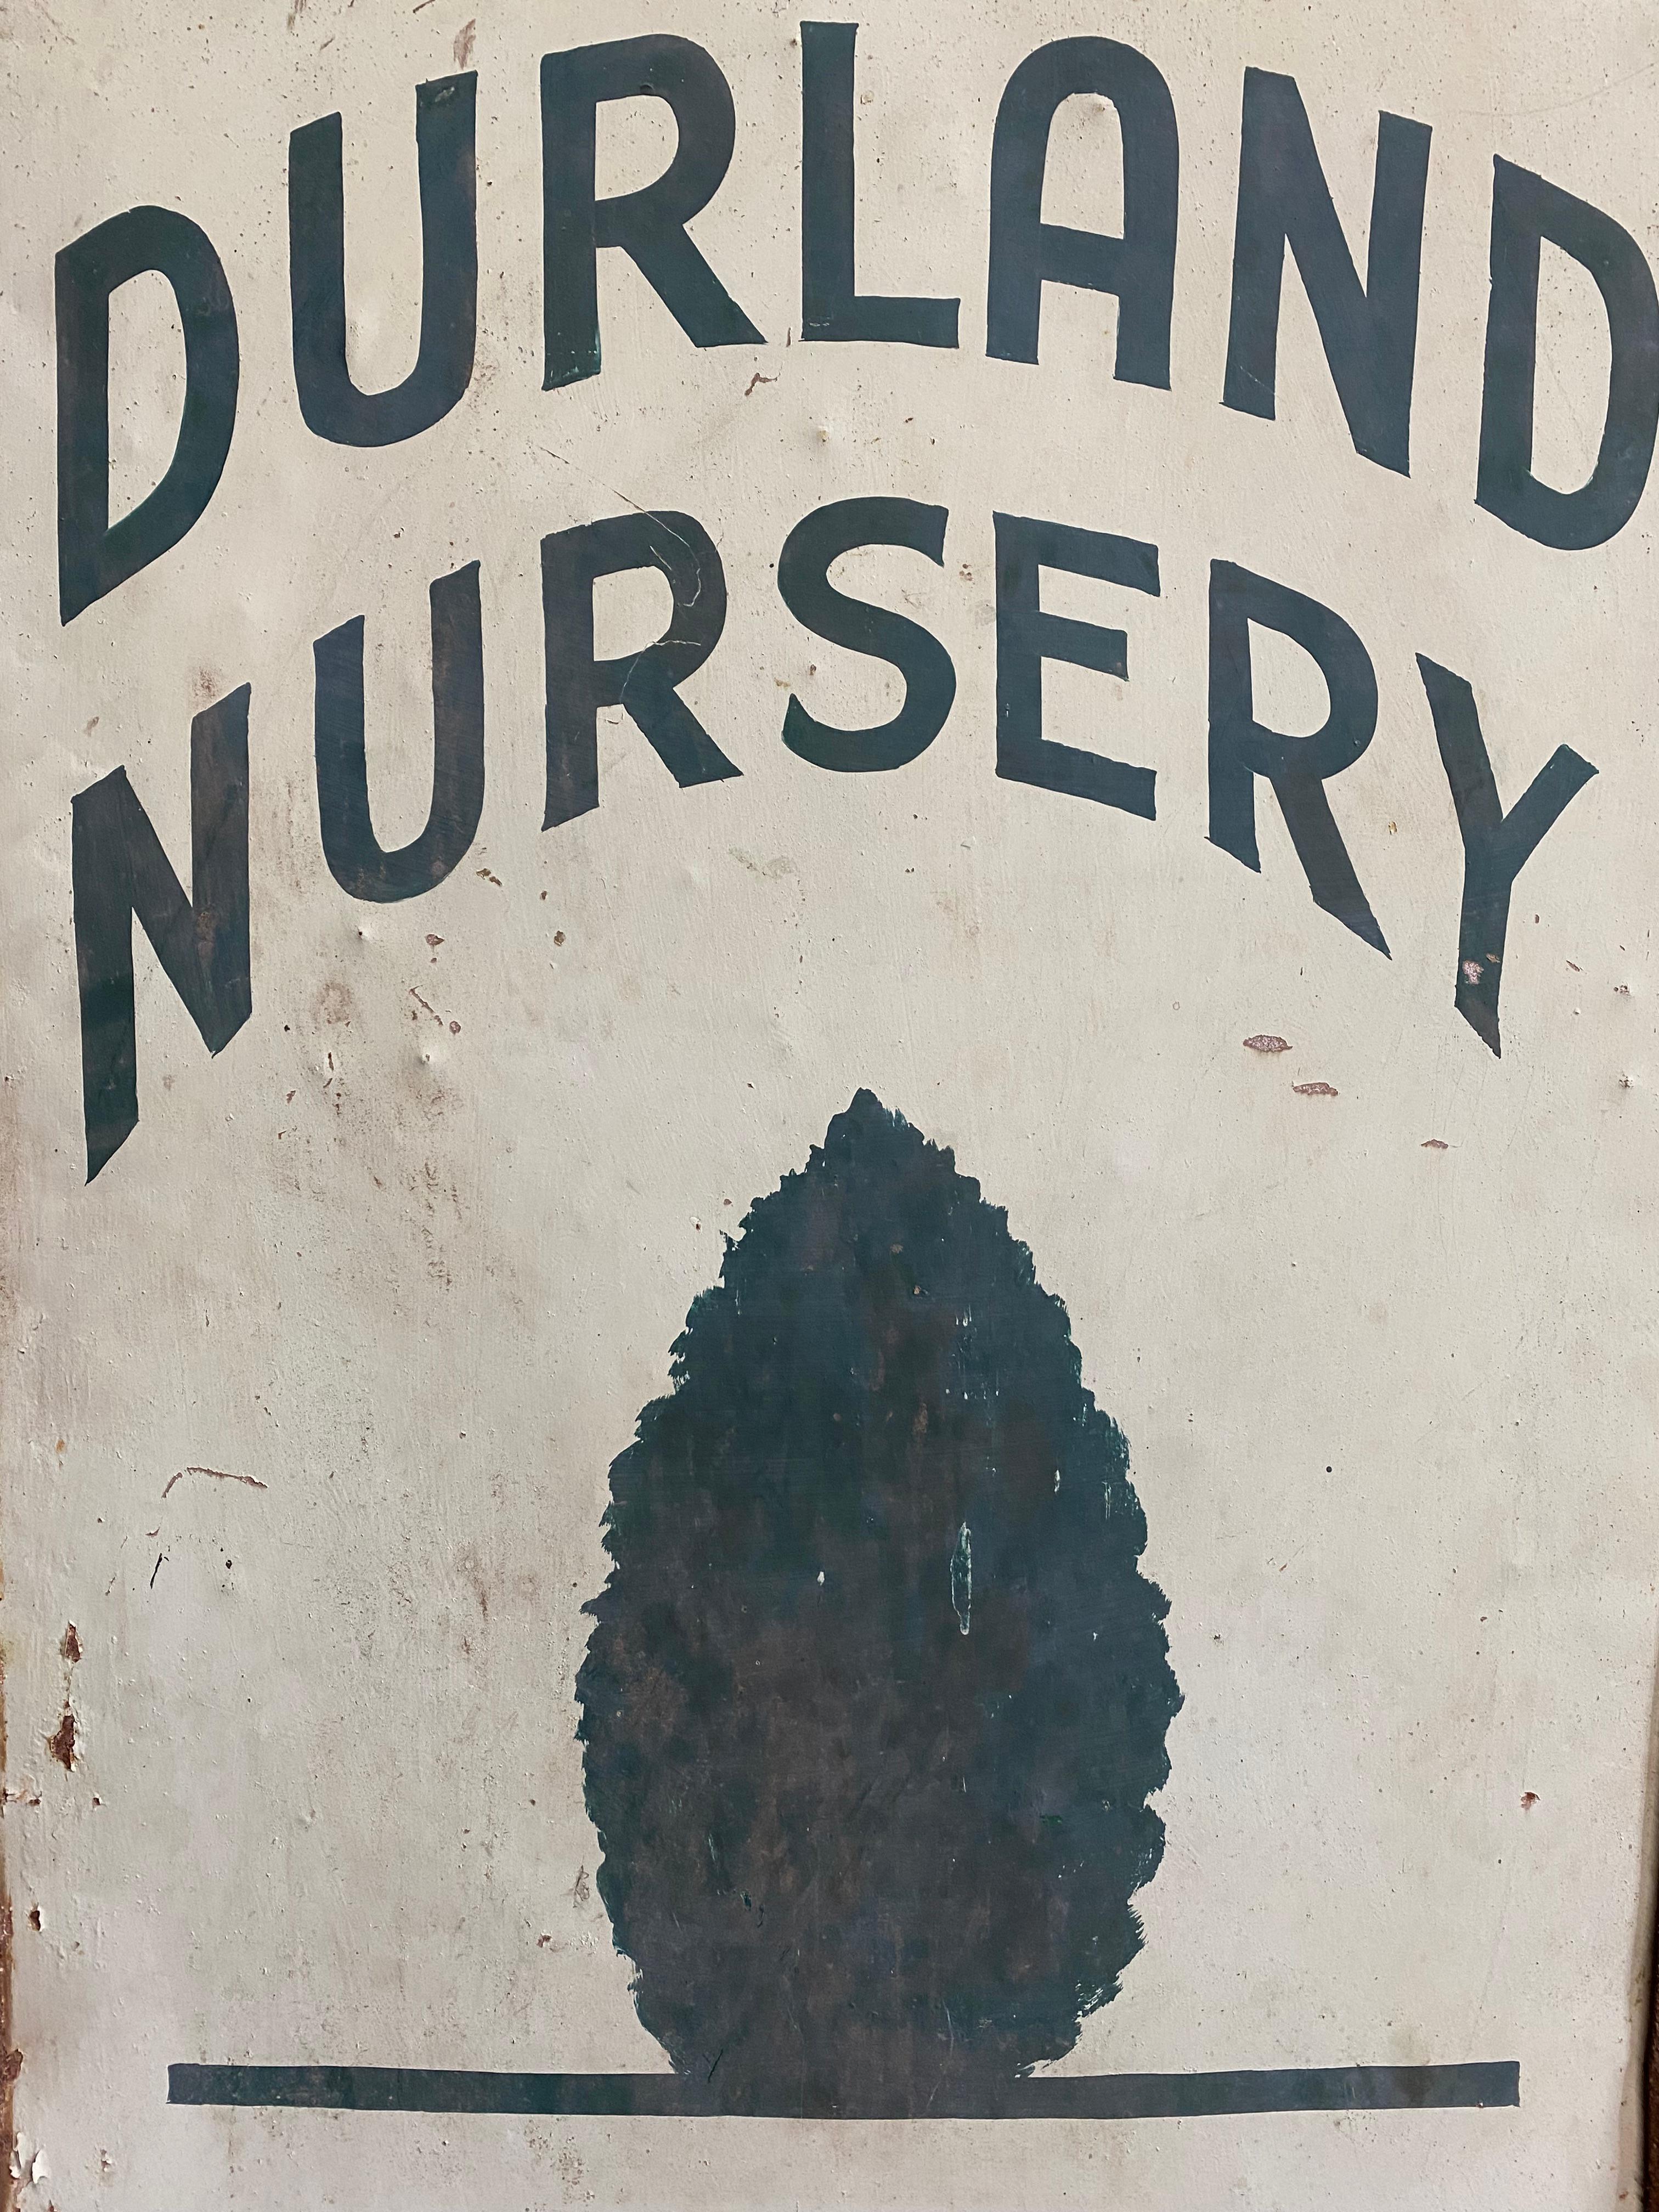 Metal Hand Painted Double Sided Durland Nursery Advertising Sign, 1930s